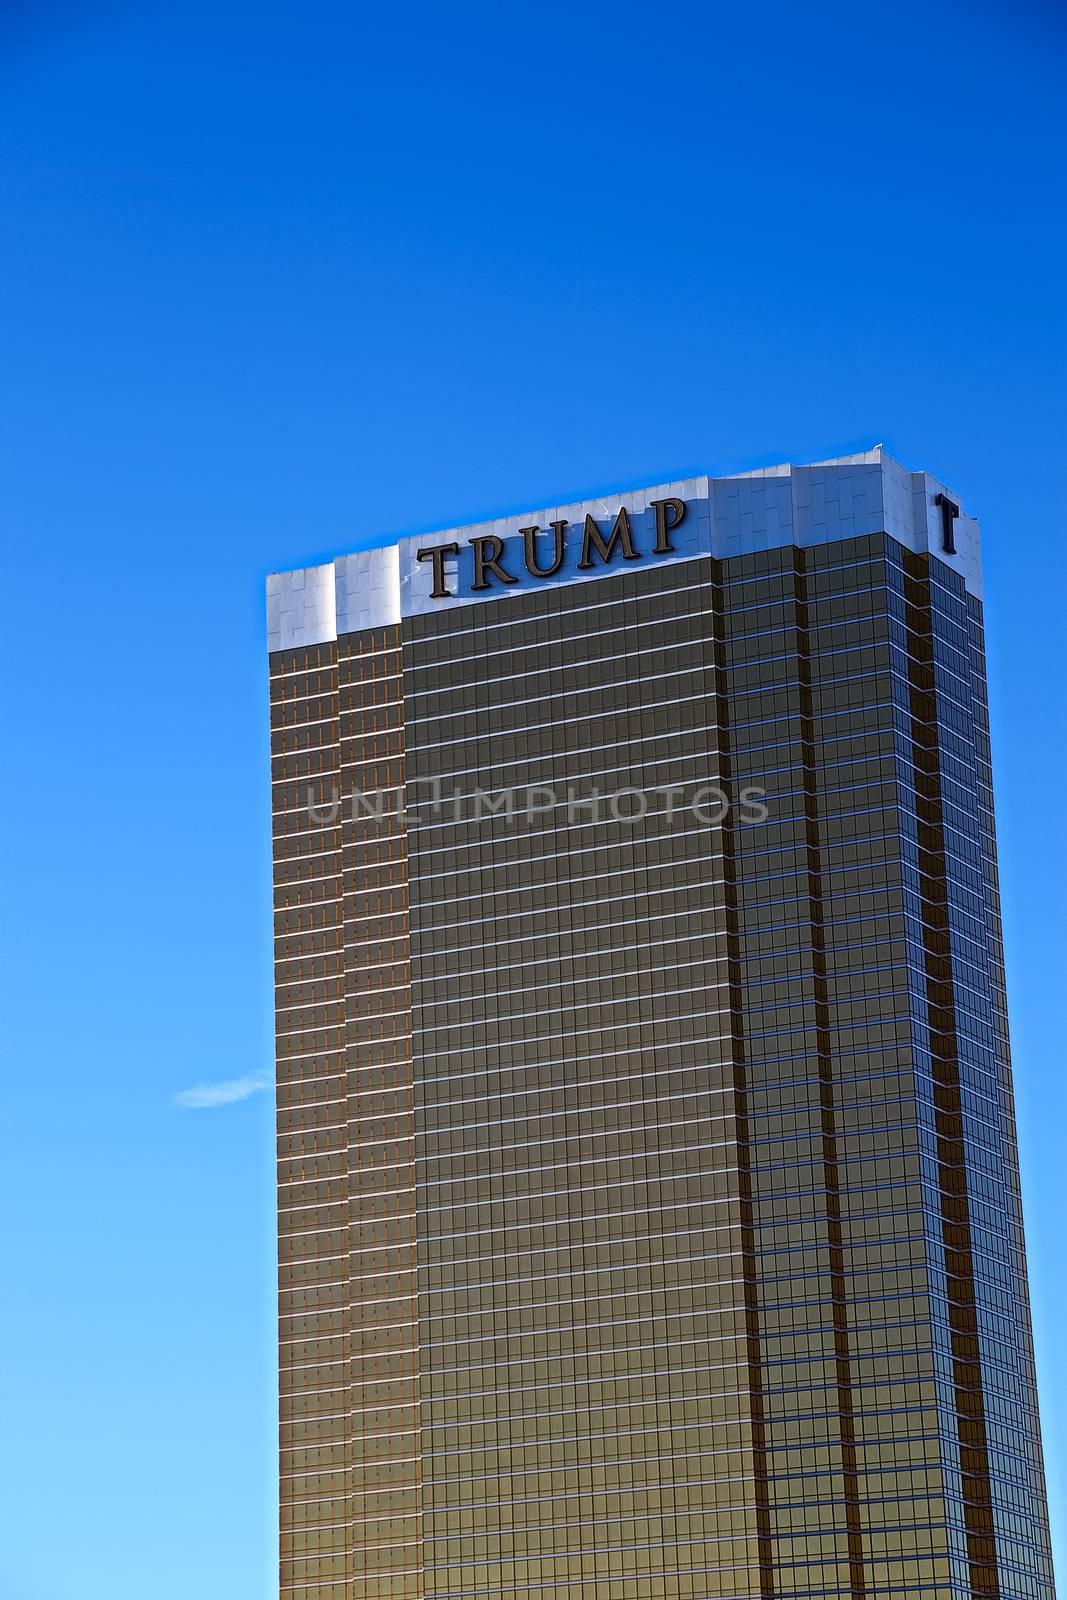 Las Vegas, USA - Sep 17, 2018: Trump International Hotel in Las Vegas, NV, named for real estate developer and politician Donald Trump. The luxury property's windows are gilded with 24-carat gold.